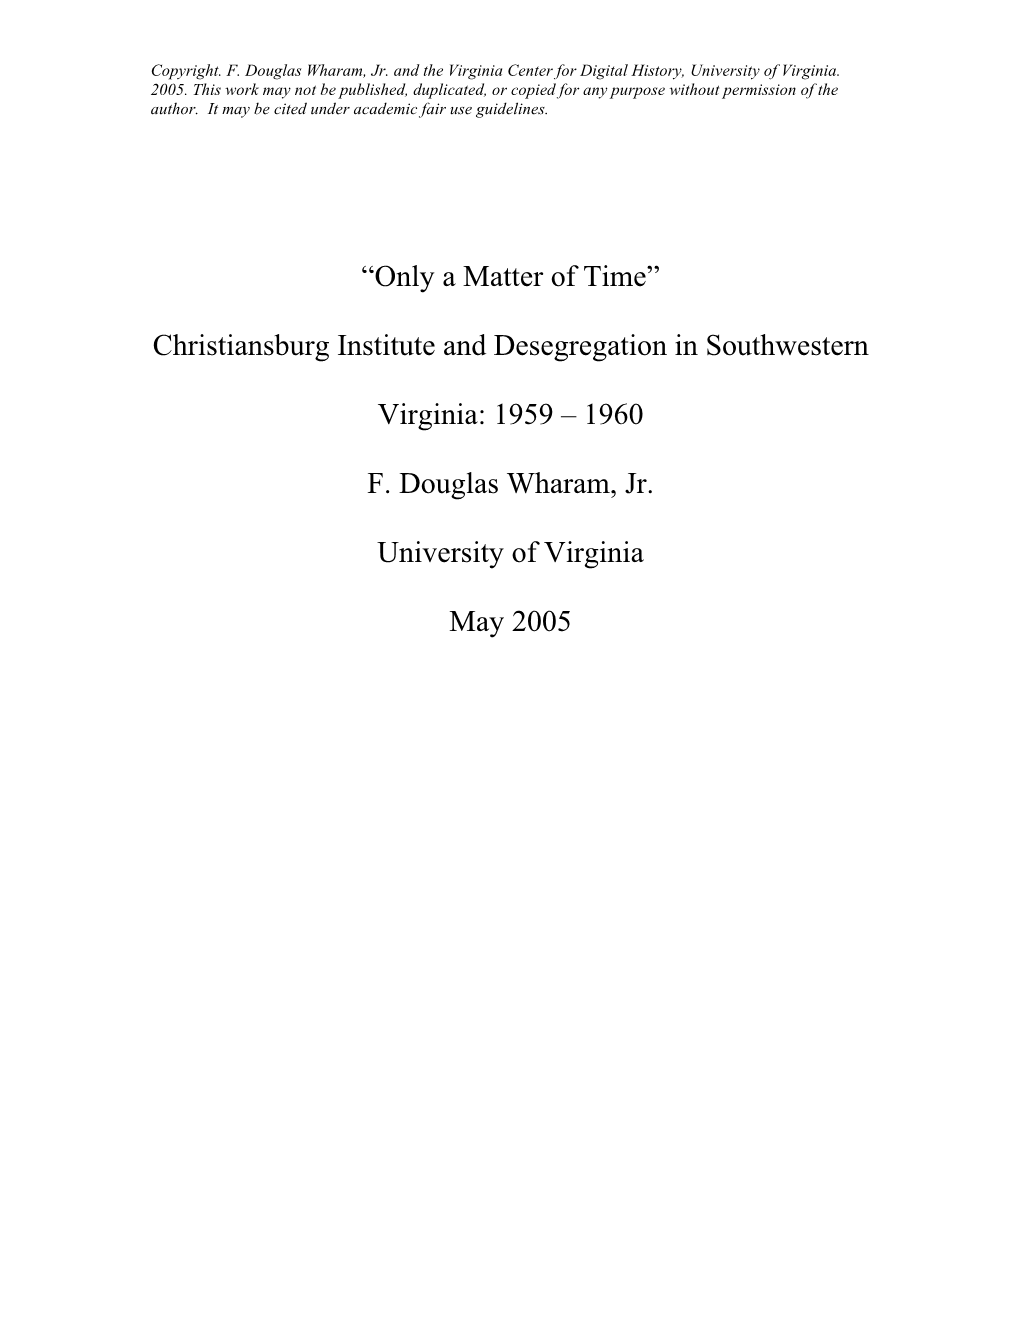 F. Douglas Wharam, "'Only a Matter of Time' Christiansburg Institute And